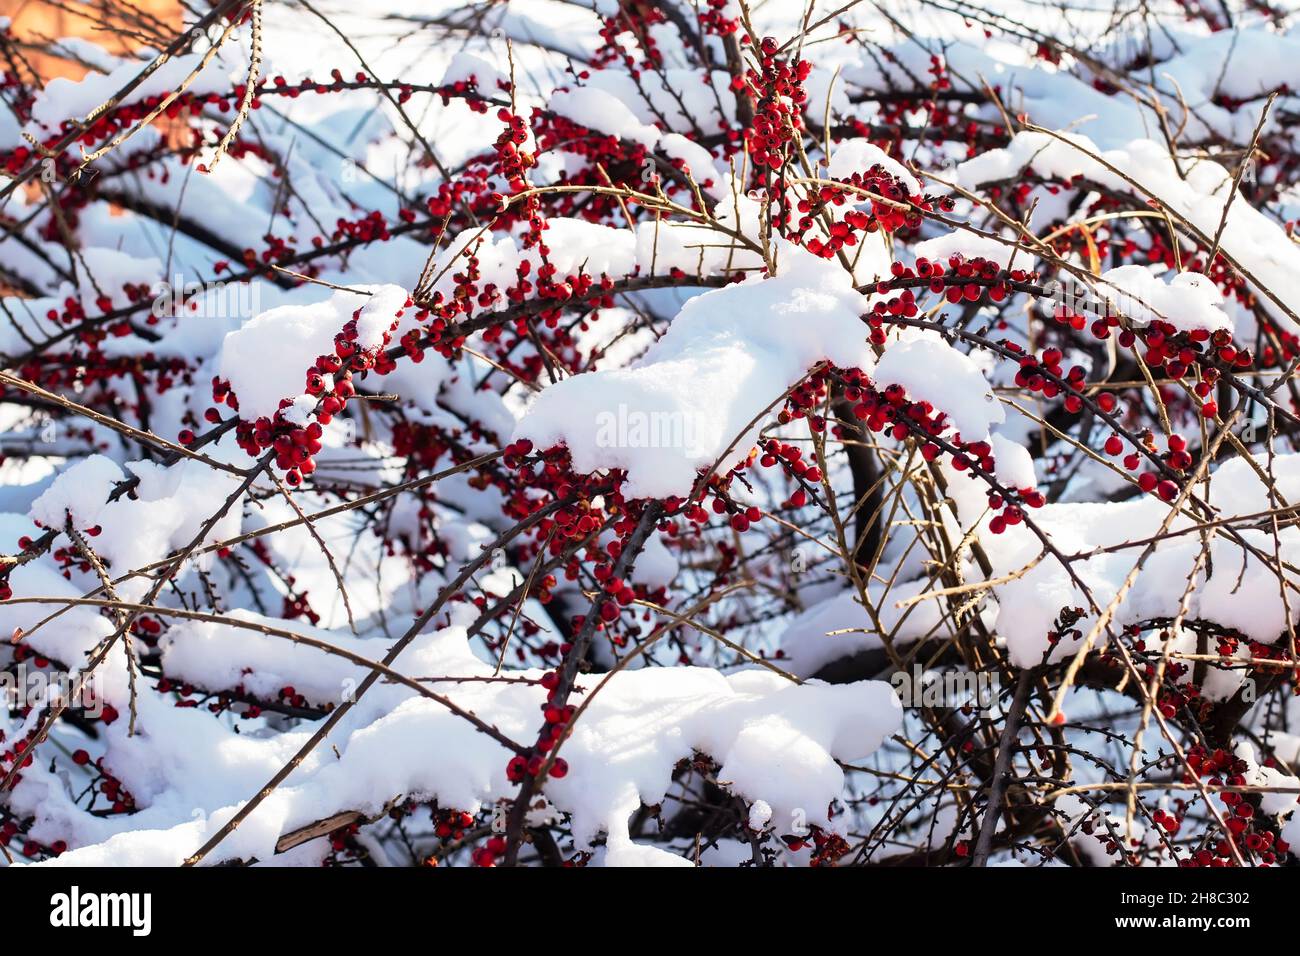 Red hawthorn berries on a snow-covered bush on a winter sunny frosty day in the forest. Snow-covered branches with bright red berries in winter. Seaso Stock Photo